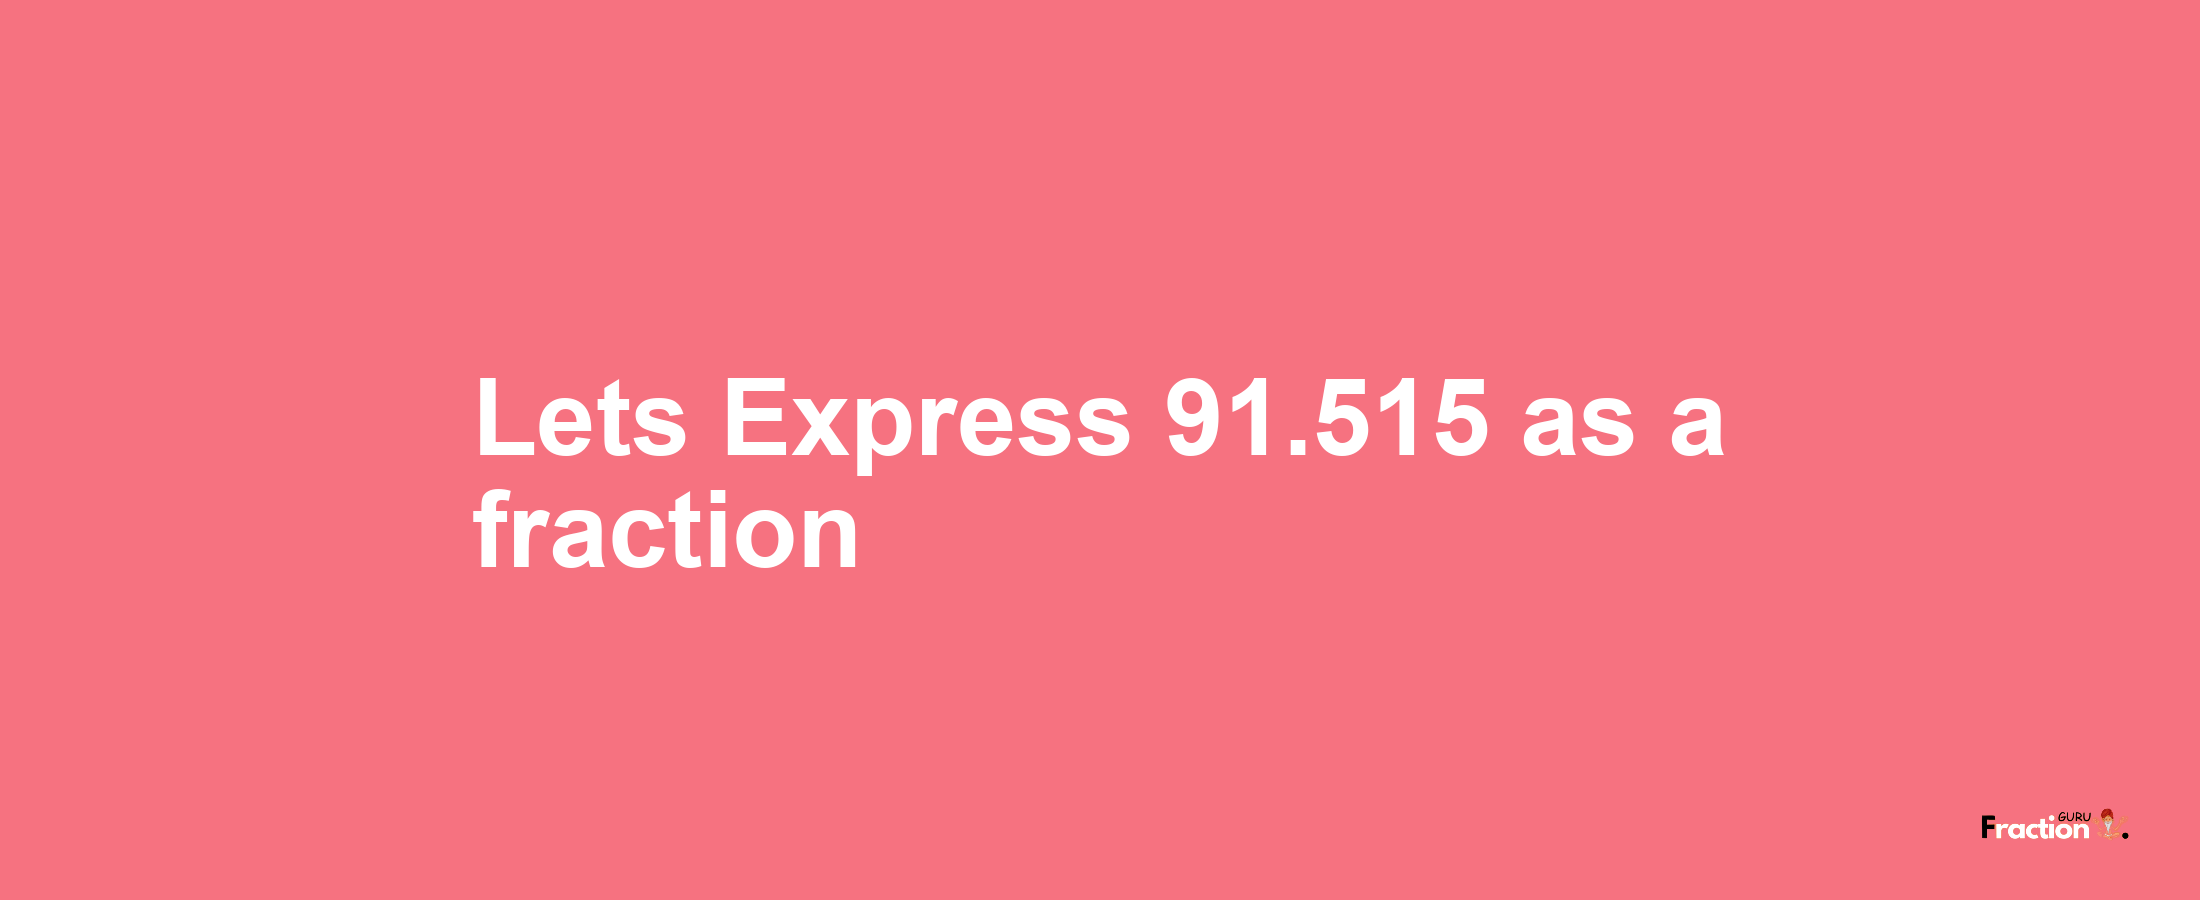 Lets Express 91.515 as afraction